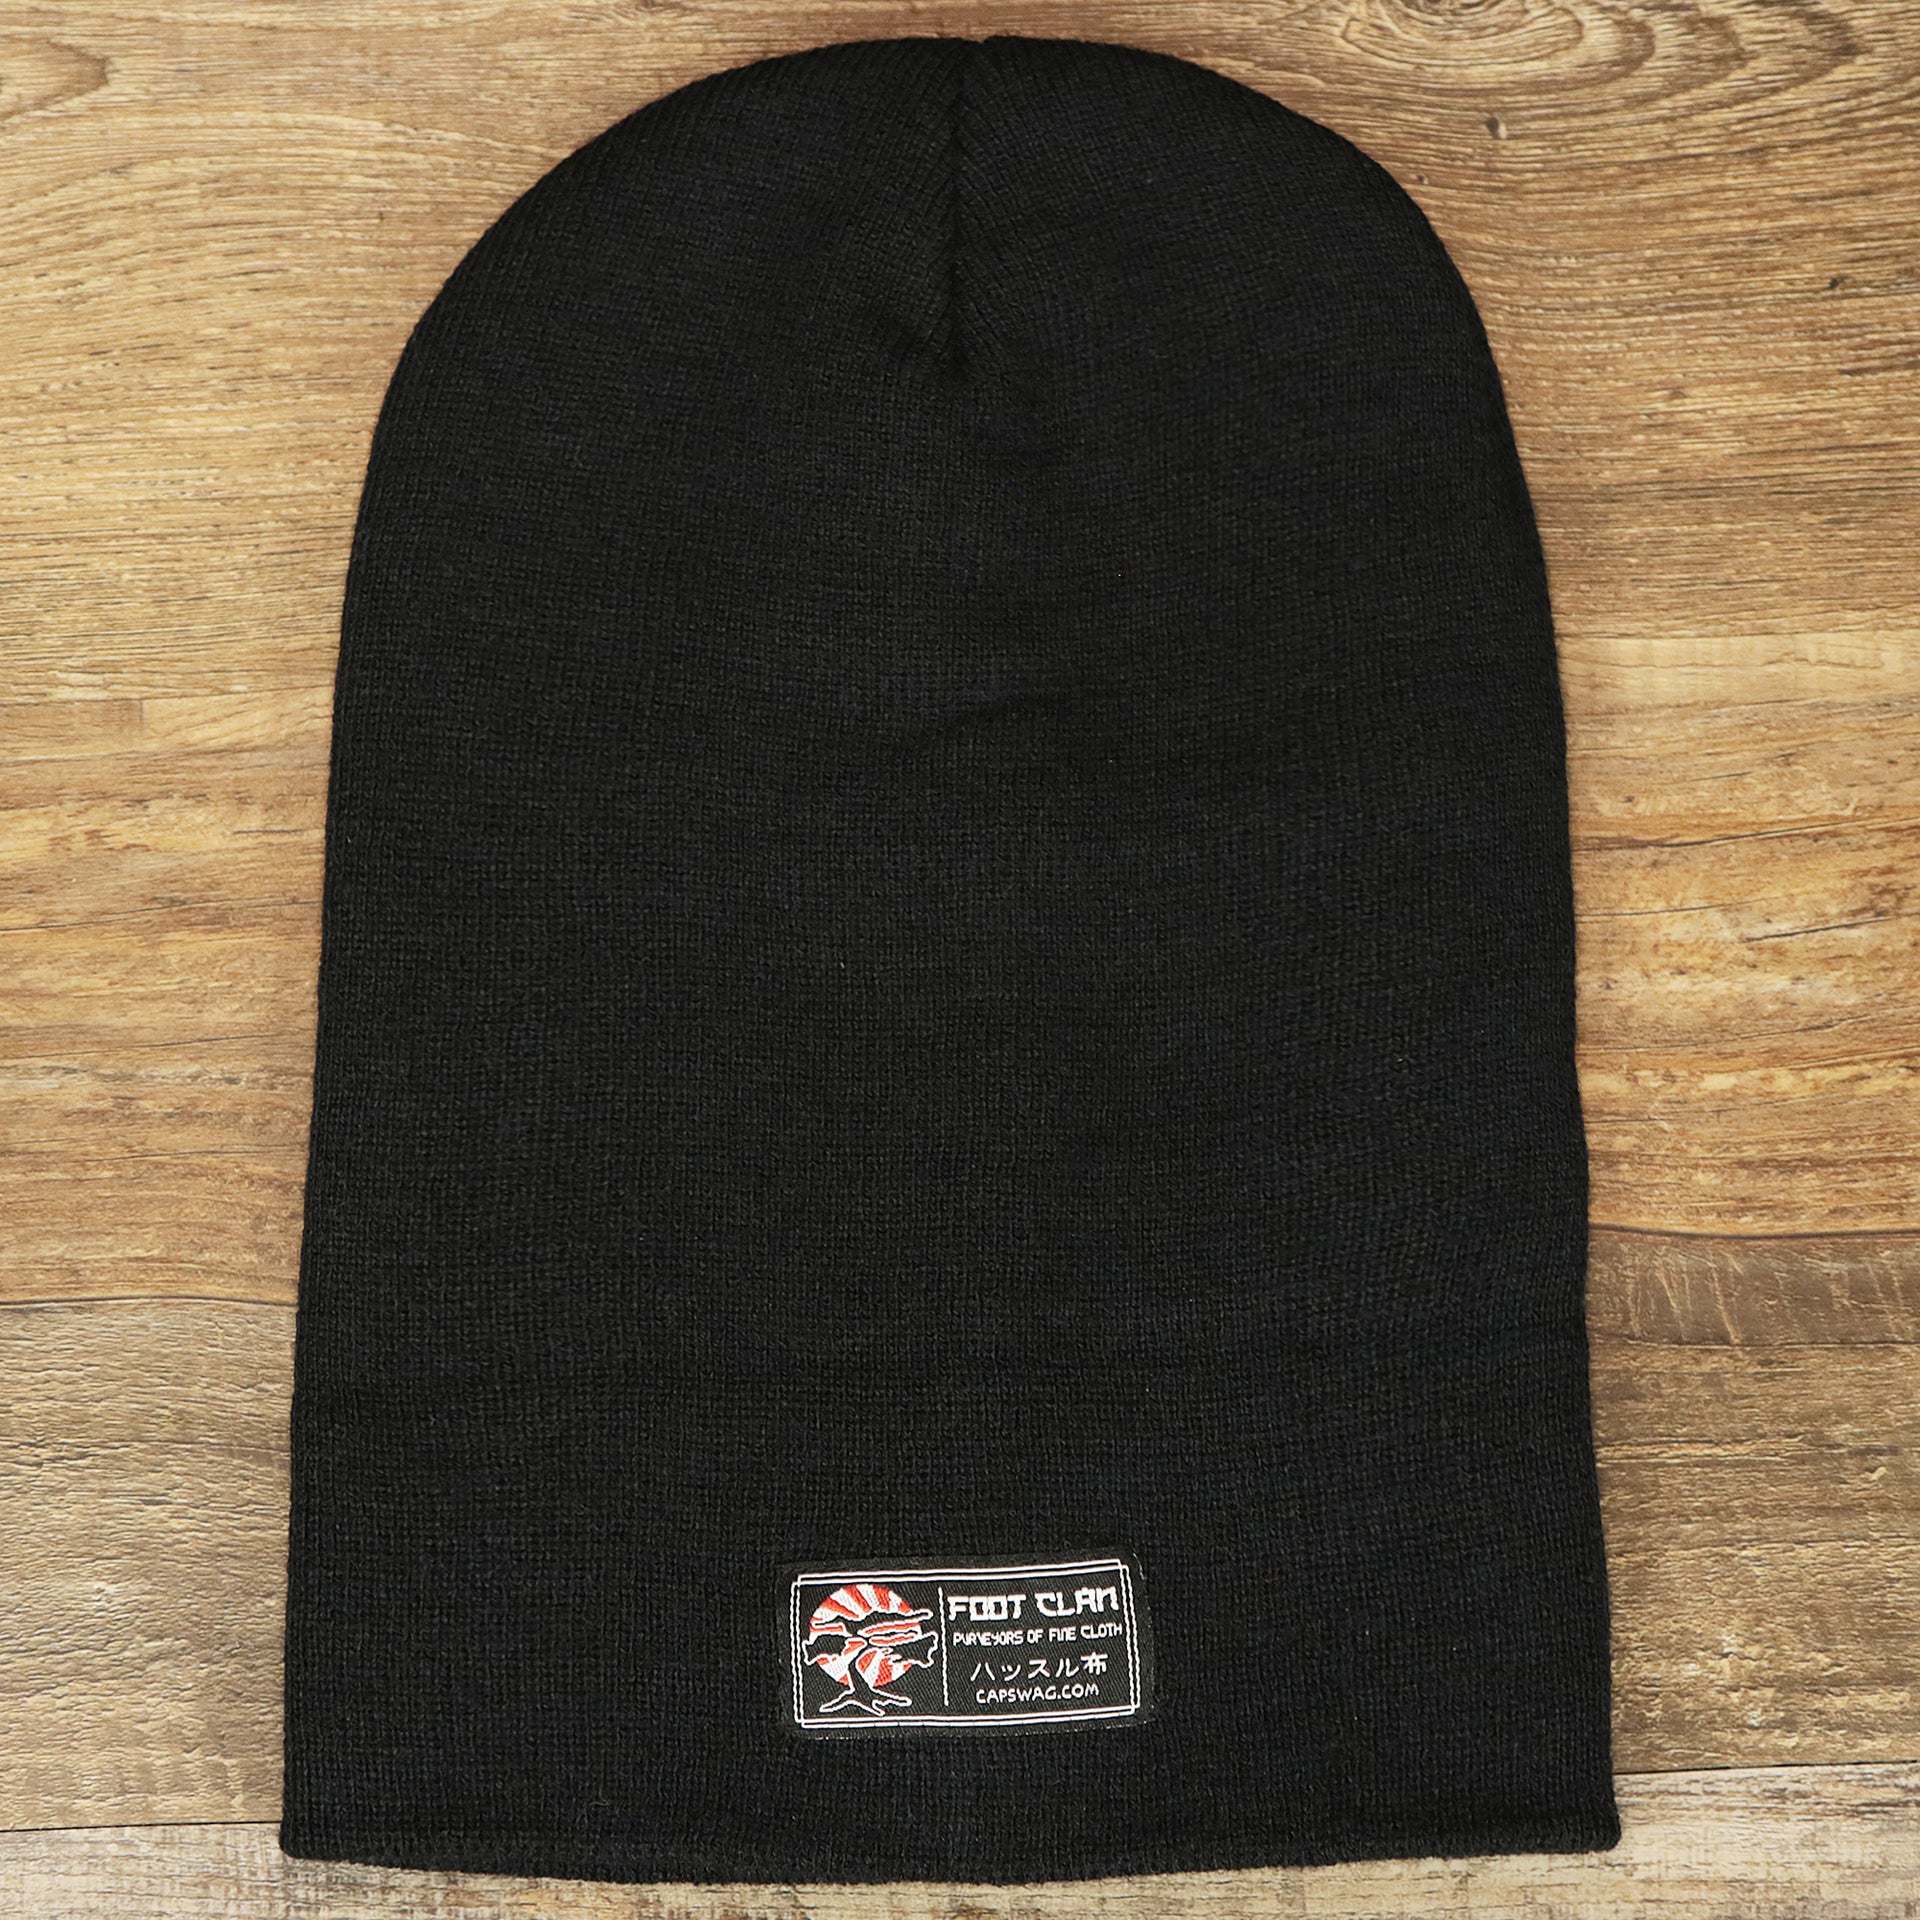 The backside of the Classic Black Winter Knit Cuffed Beanie uncuffed